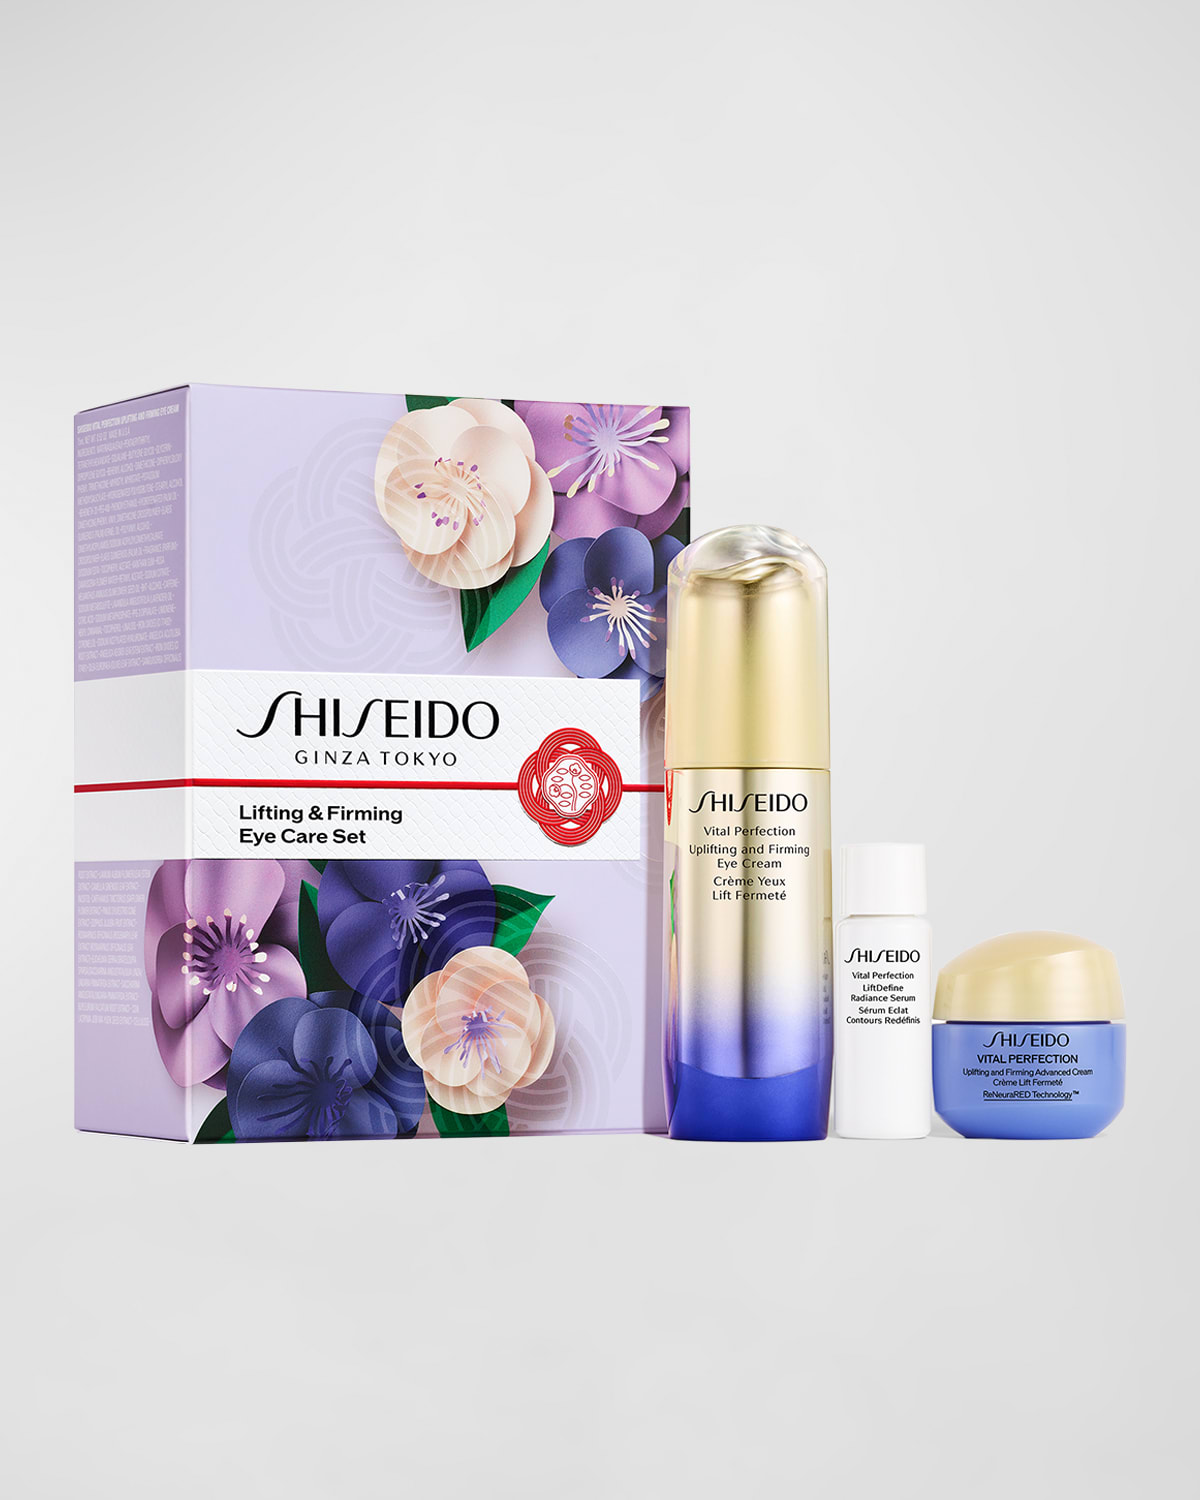 Limited Edition Lifting & Firming Eye Care Set ($152 Value)